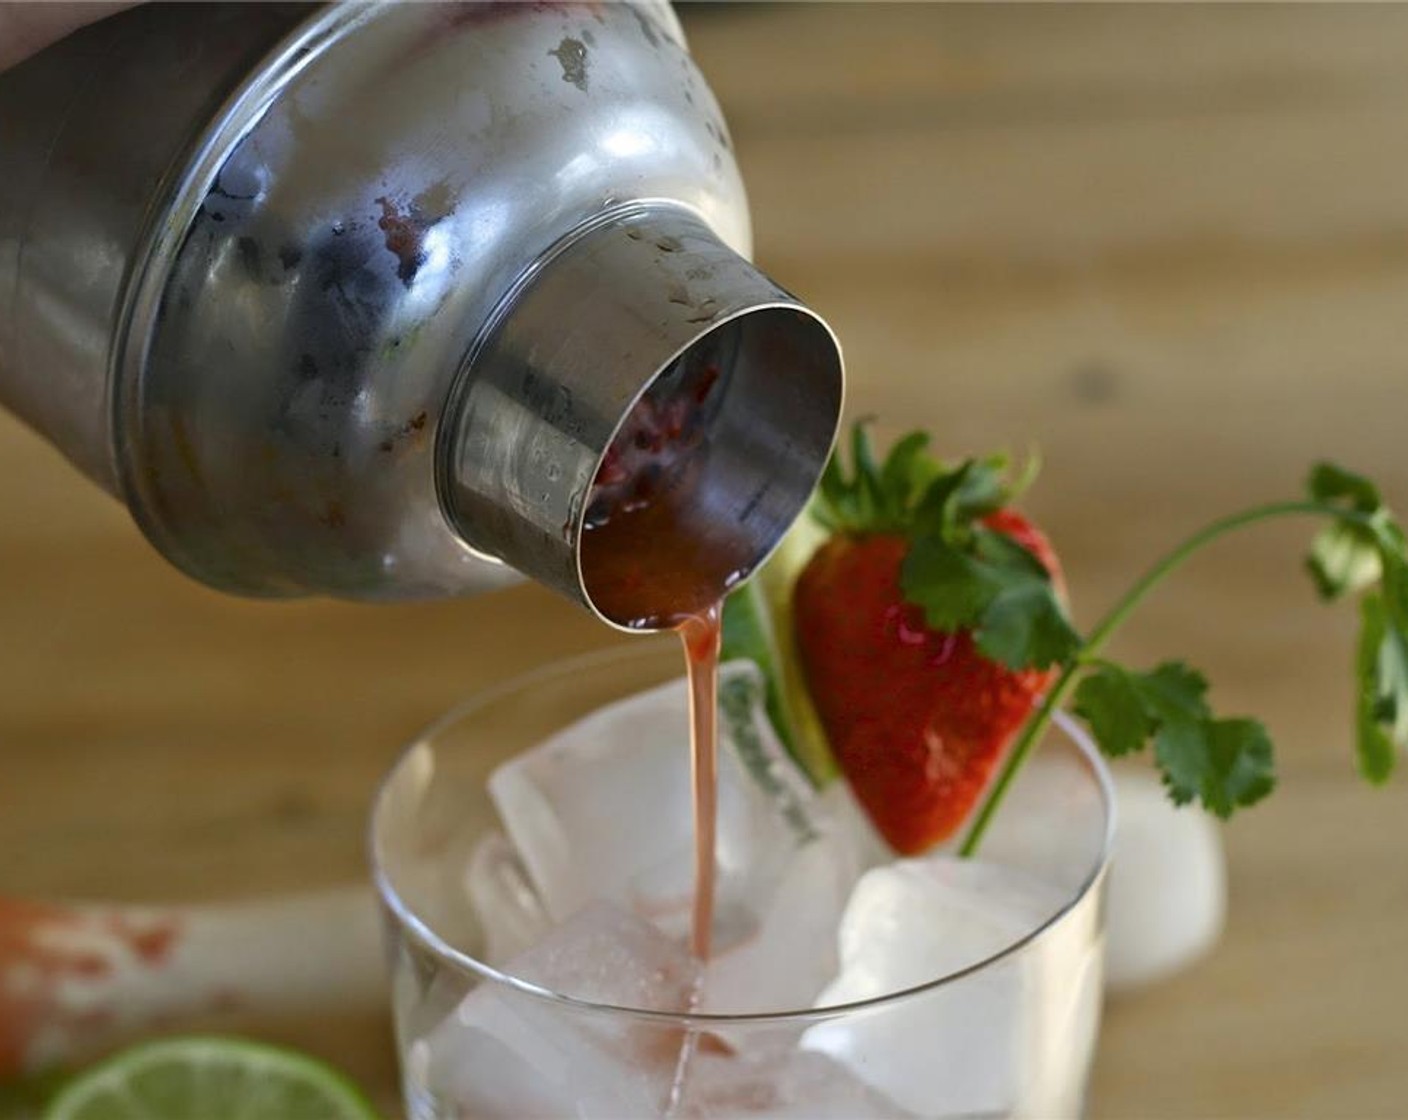 step 3 Strain into a glass filled with ice and garnished with a Fresh Strawberry (1) lime wheel and sprig of cilantro.